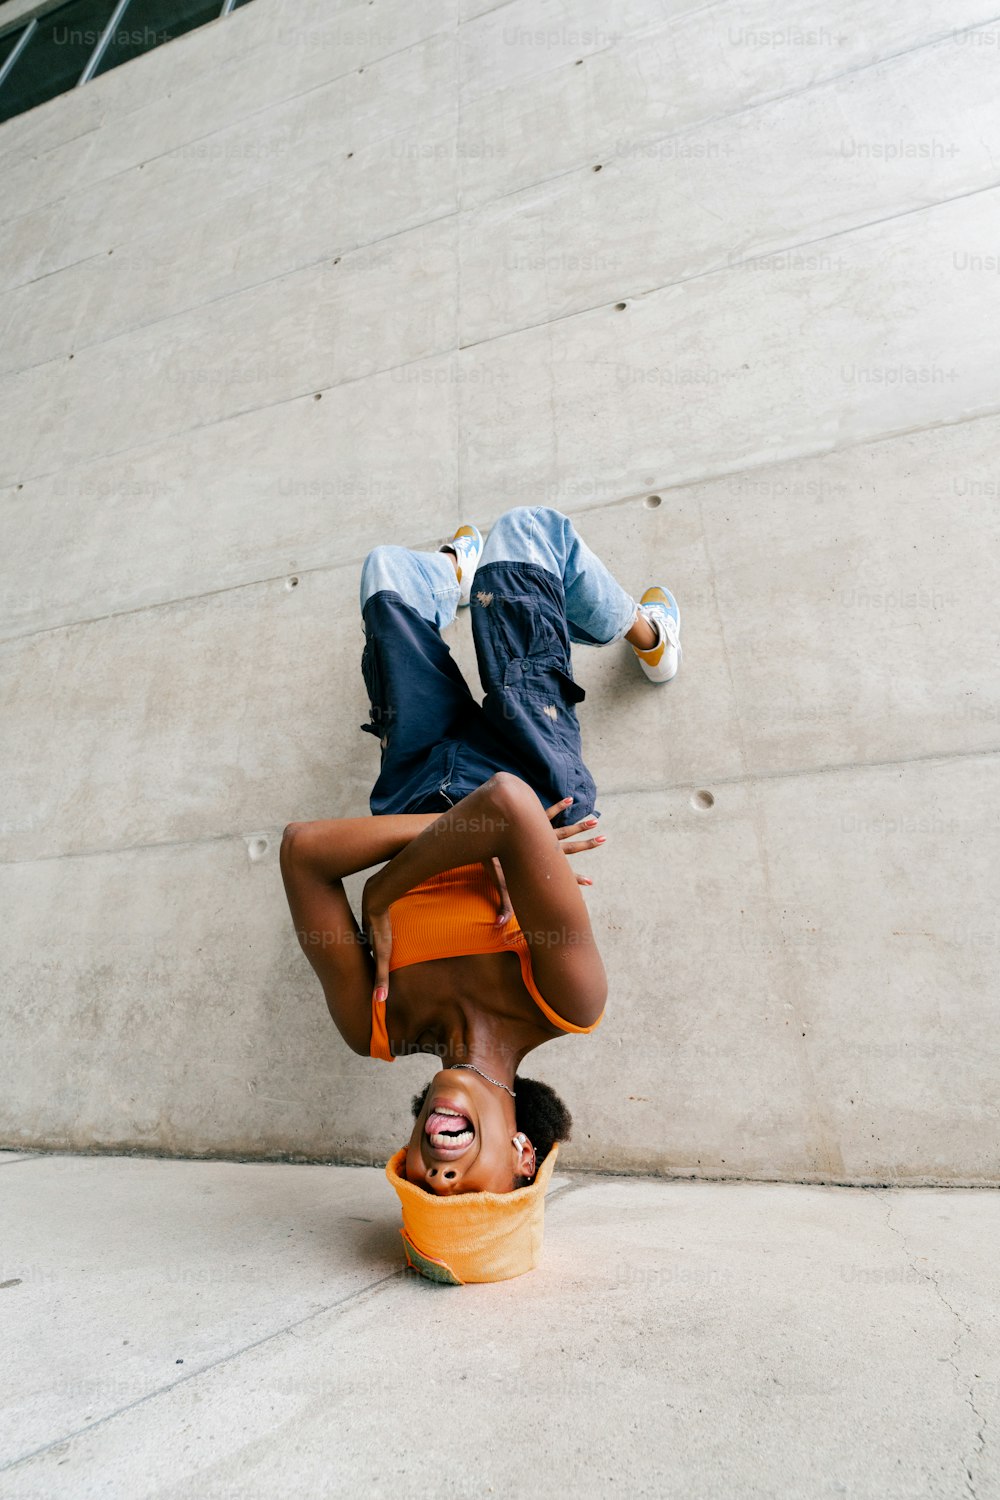 a person upside down on a skateboard